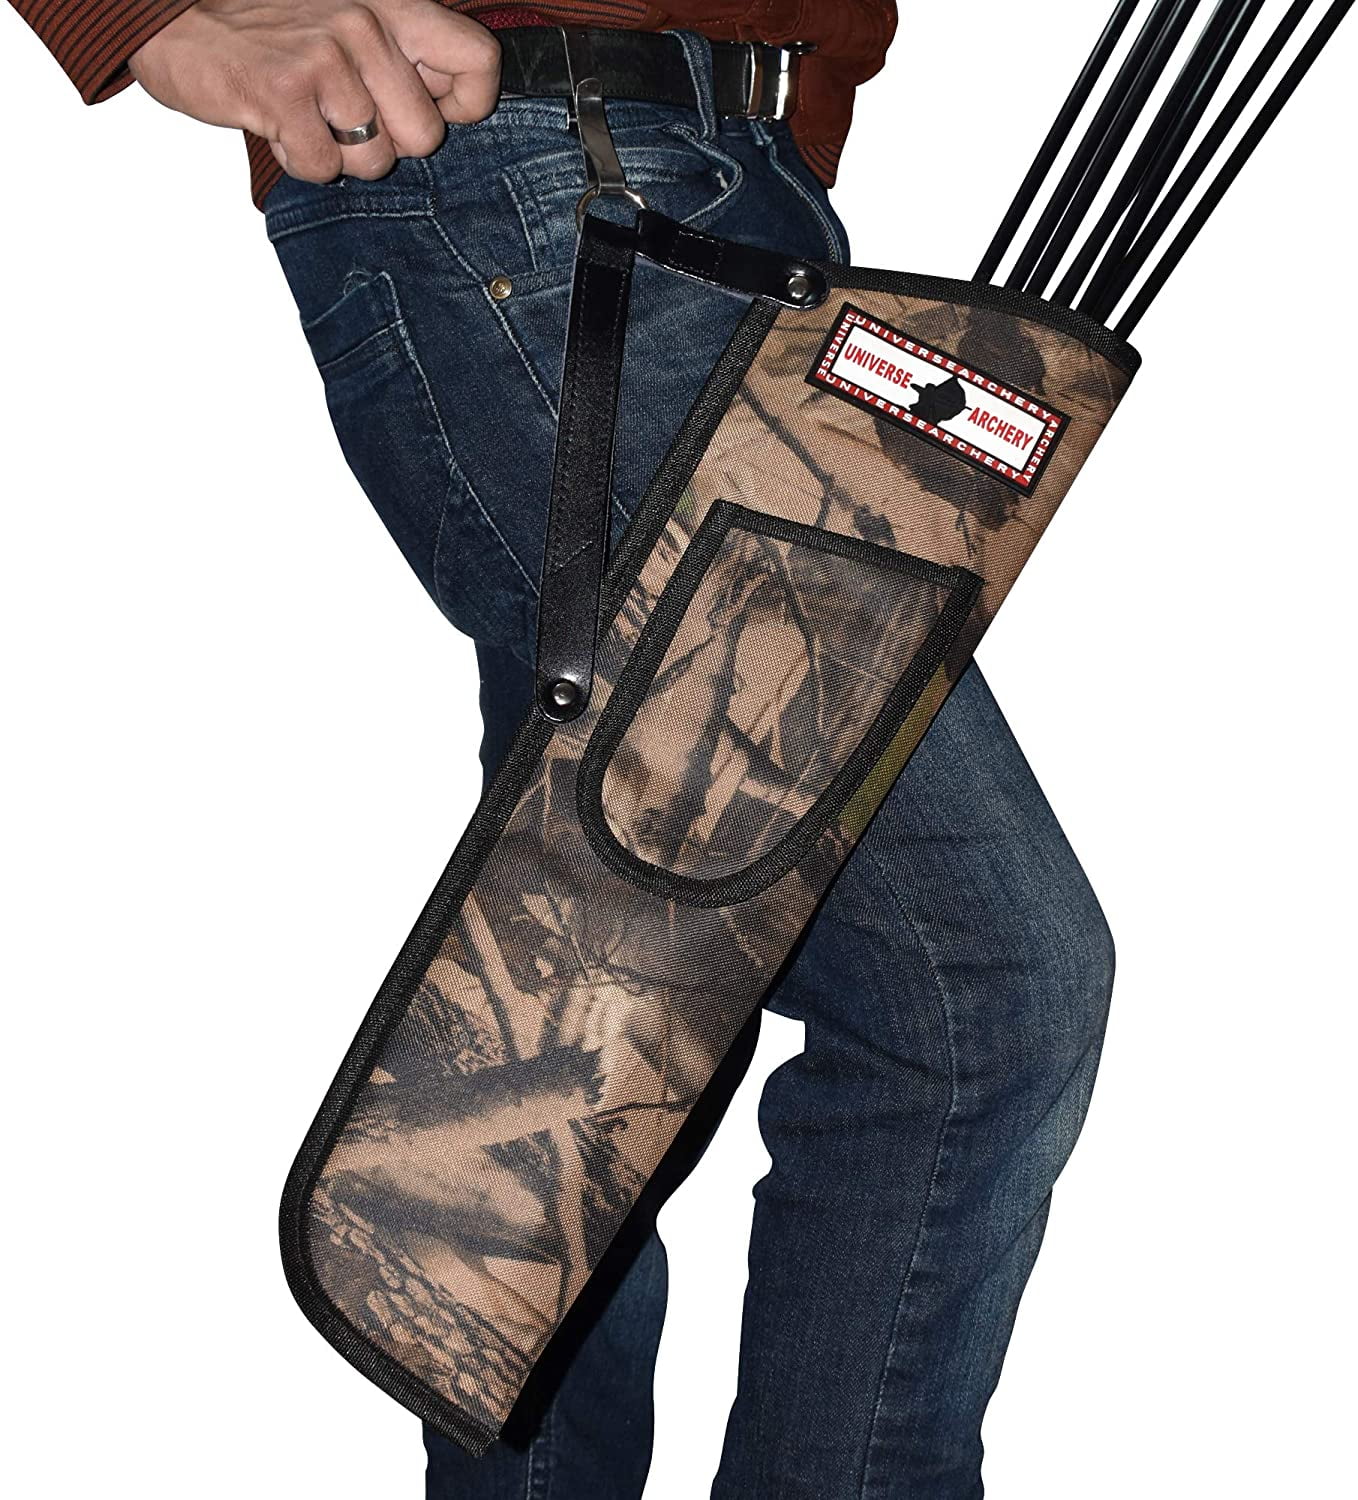 Leather Archery Arrrow Pocket Quiver Hip Bag for outdoor compound bow hunting 